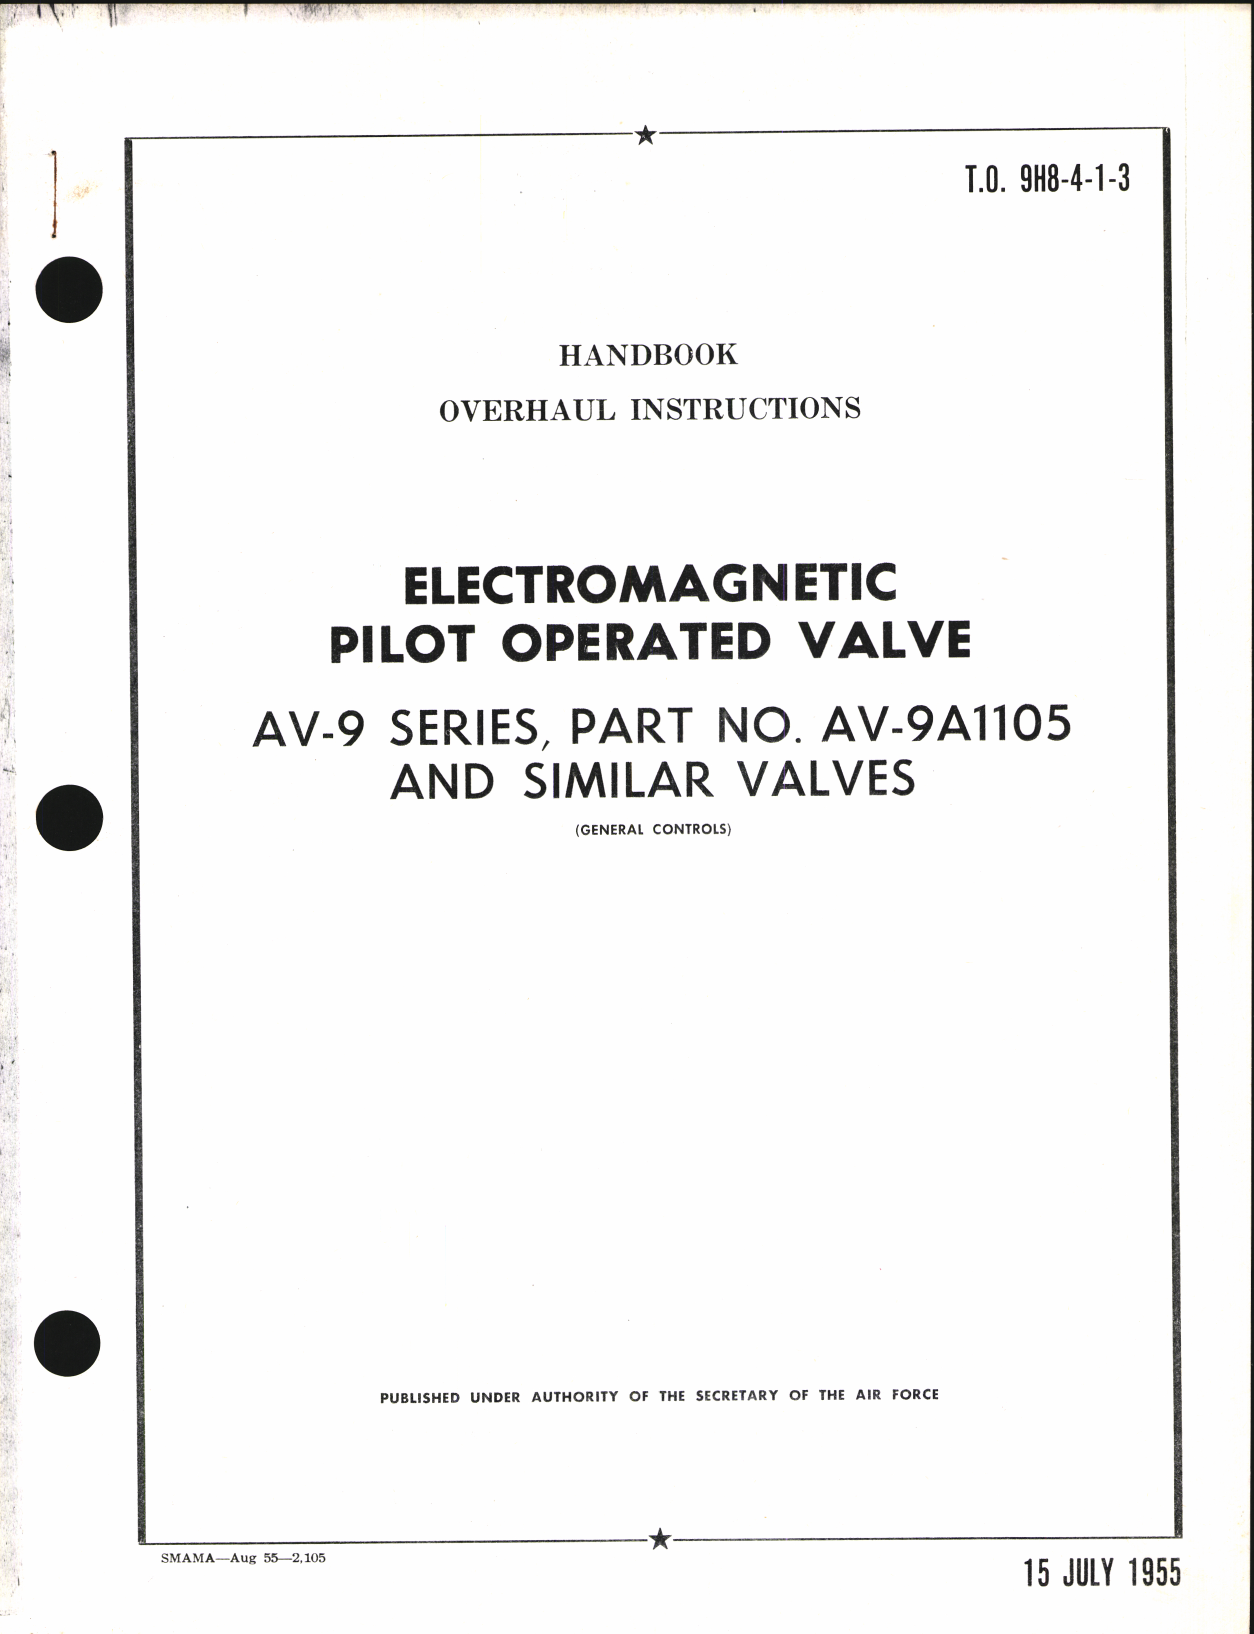 Sample page 1 from AirCorps Library document: Overhaul Instructions for Electromagnetic Pilot Operated Valve Av-9 Series, Part no. Av-9A1105 and Similar Valves